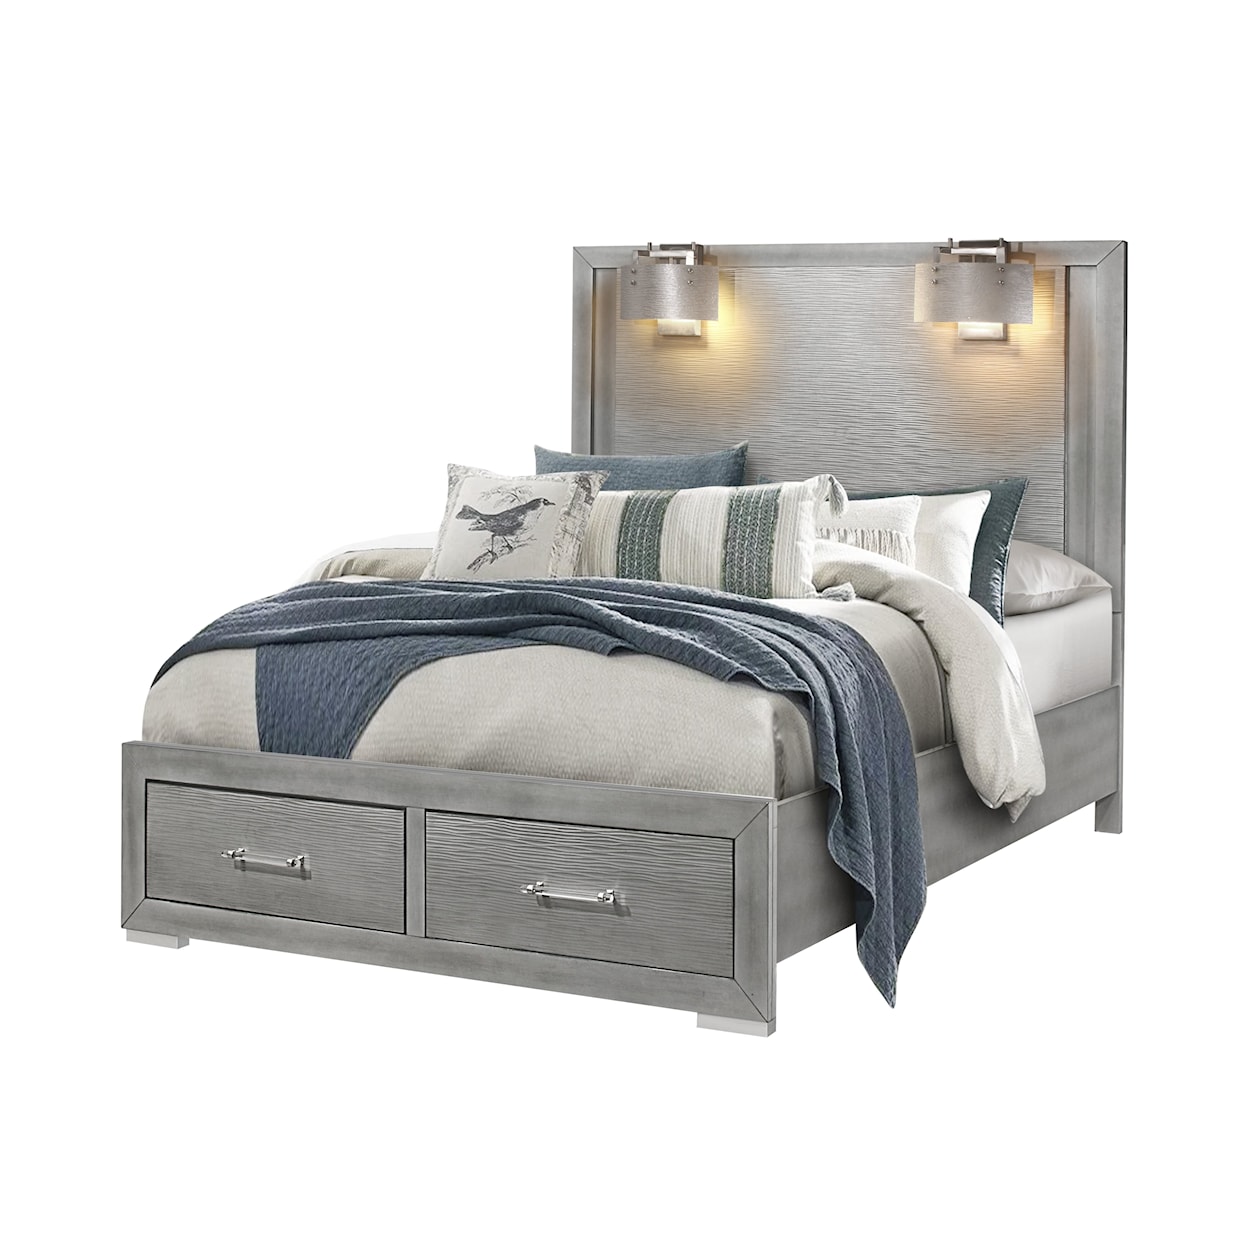 Global Furniture Tiffany Queen Storage Bed with Built-In Lamps